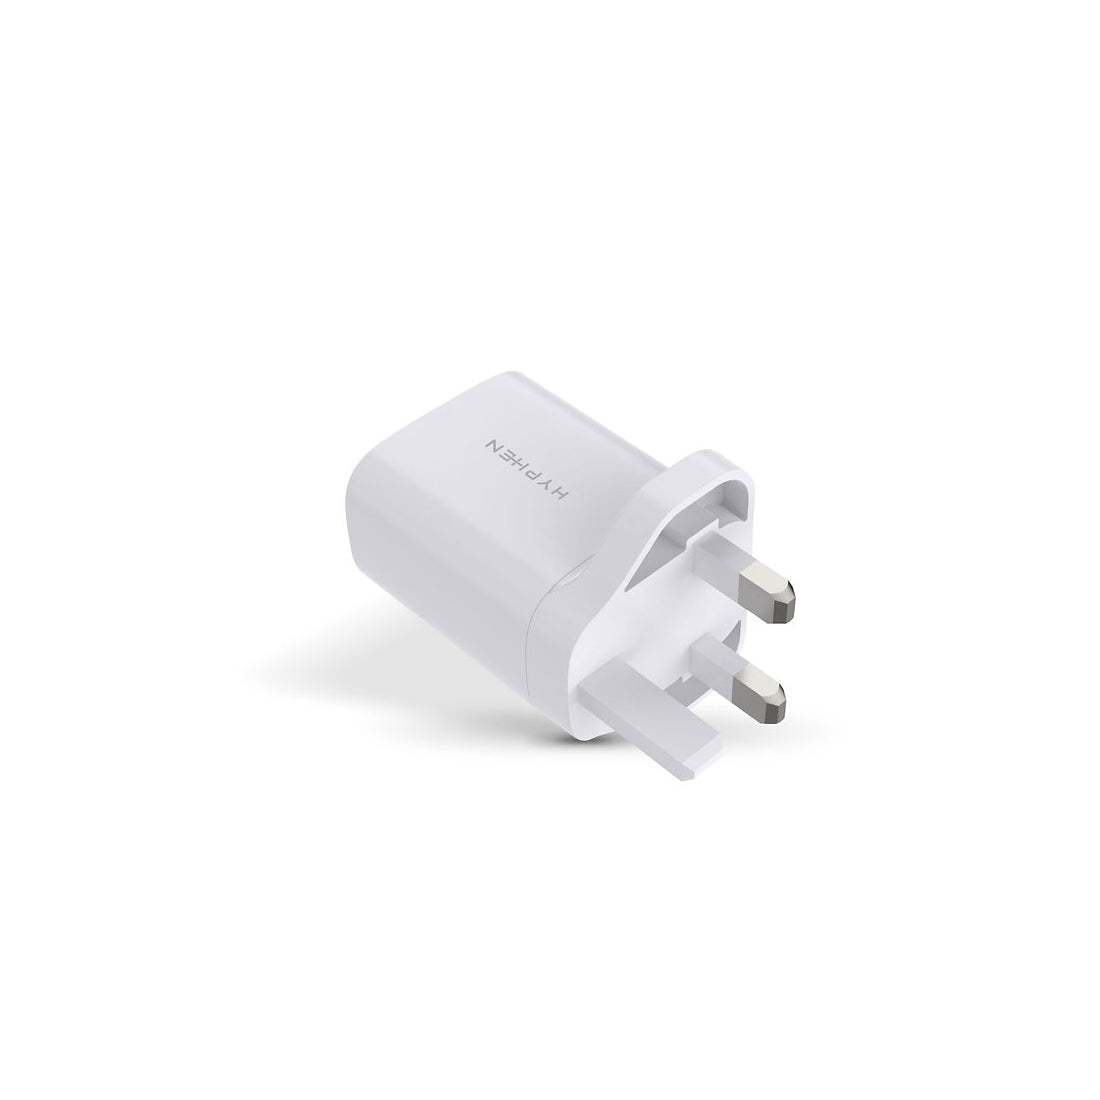 Hyphen VoltPort DUO PD Wall Charger - White - شاحن - Store 974 | ستور ٩٧٤